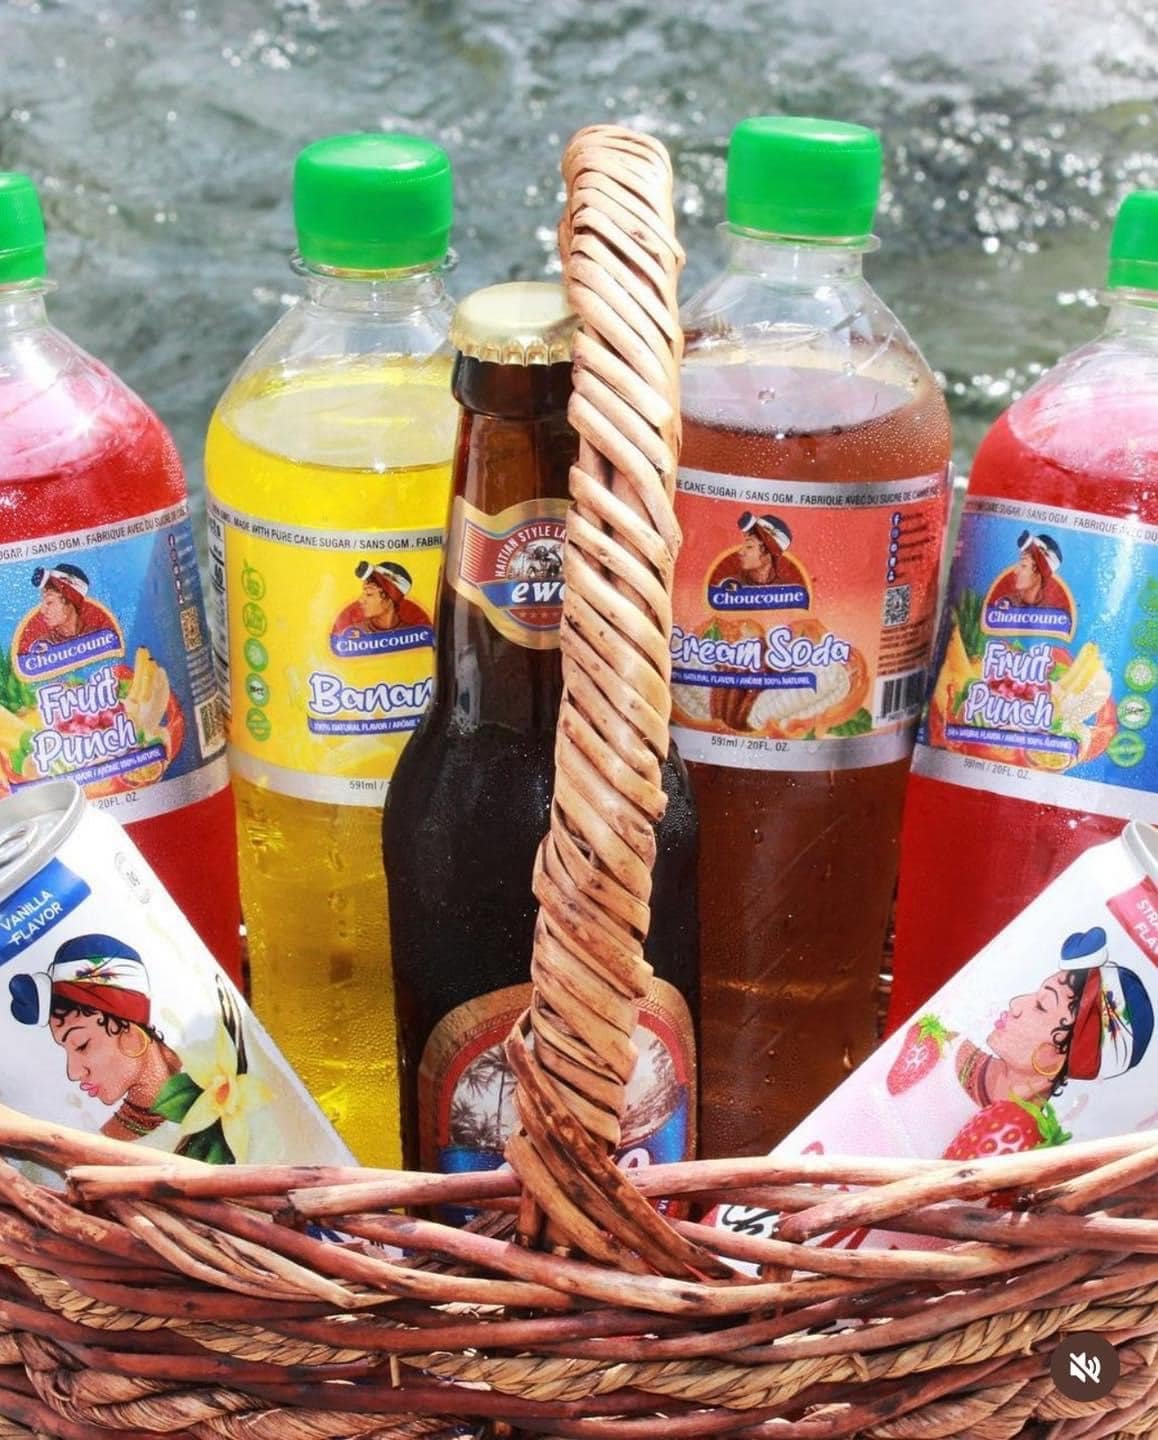 Choucoune products 

Quench your unique thirst with Kola Choucoune.

📞 Call us at +1 (954) 909-3701 to order your Choucoune in bulk.

Order Choucoune online through this link:
https://linktr.ee/kolachoucoune